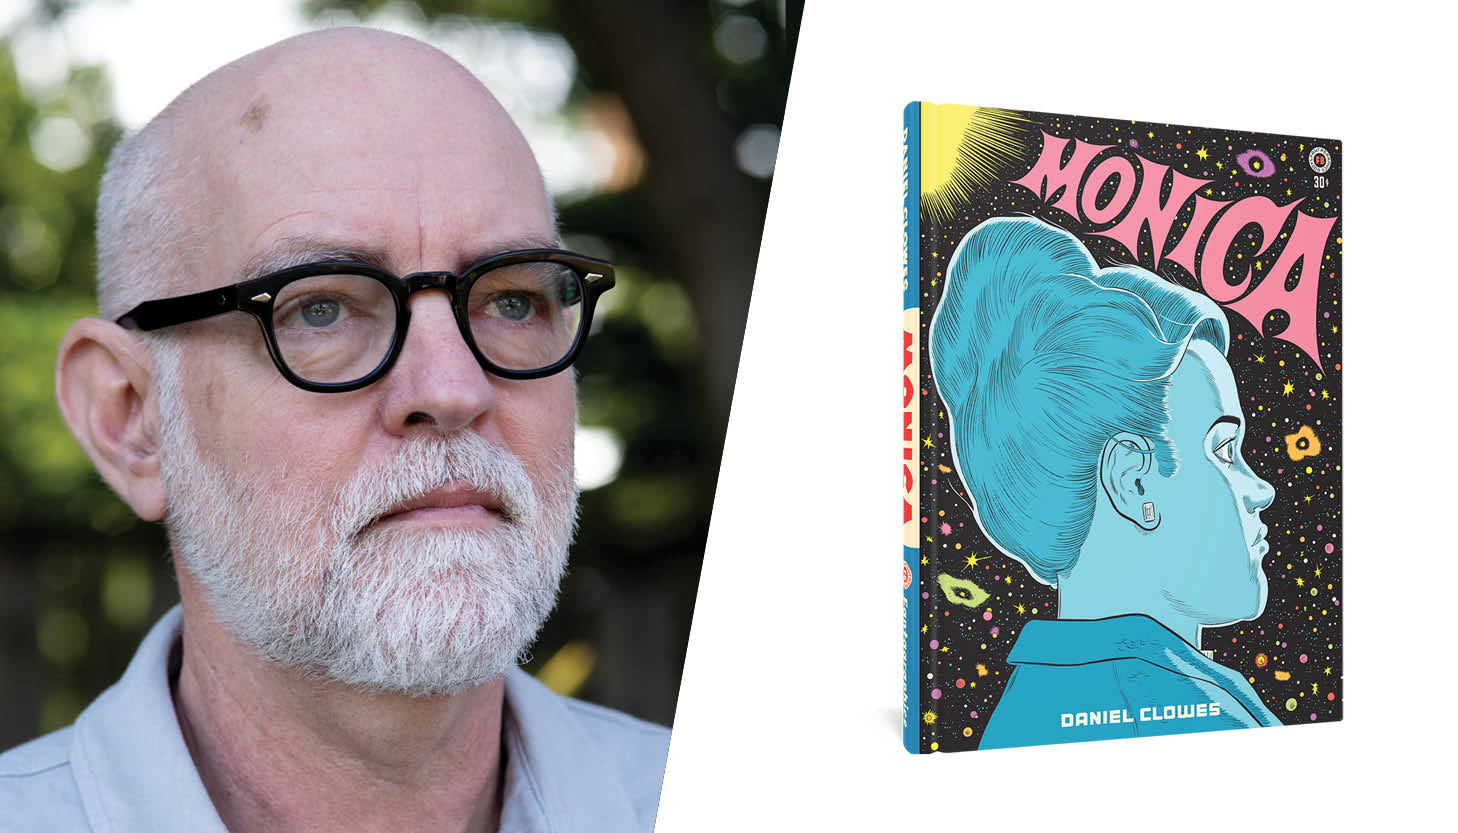 Portrait of a bearded man with glasses. Next to him is the cover of a book titled Monica. On the cover is a drawing of a profile of a woman with a blue tint.